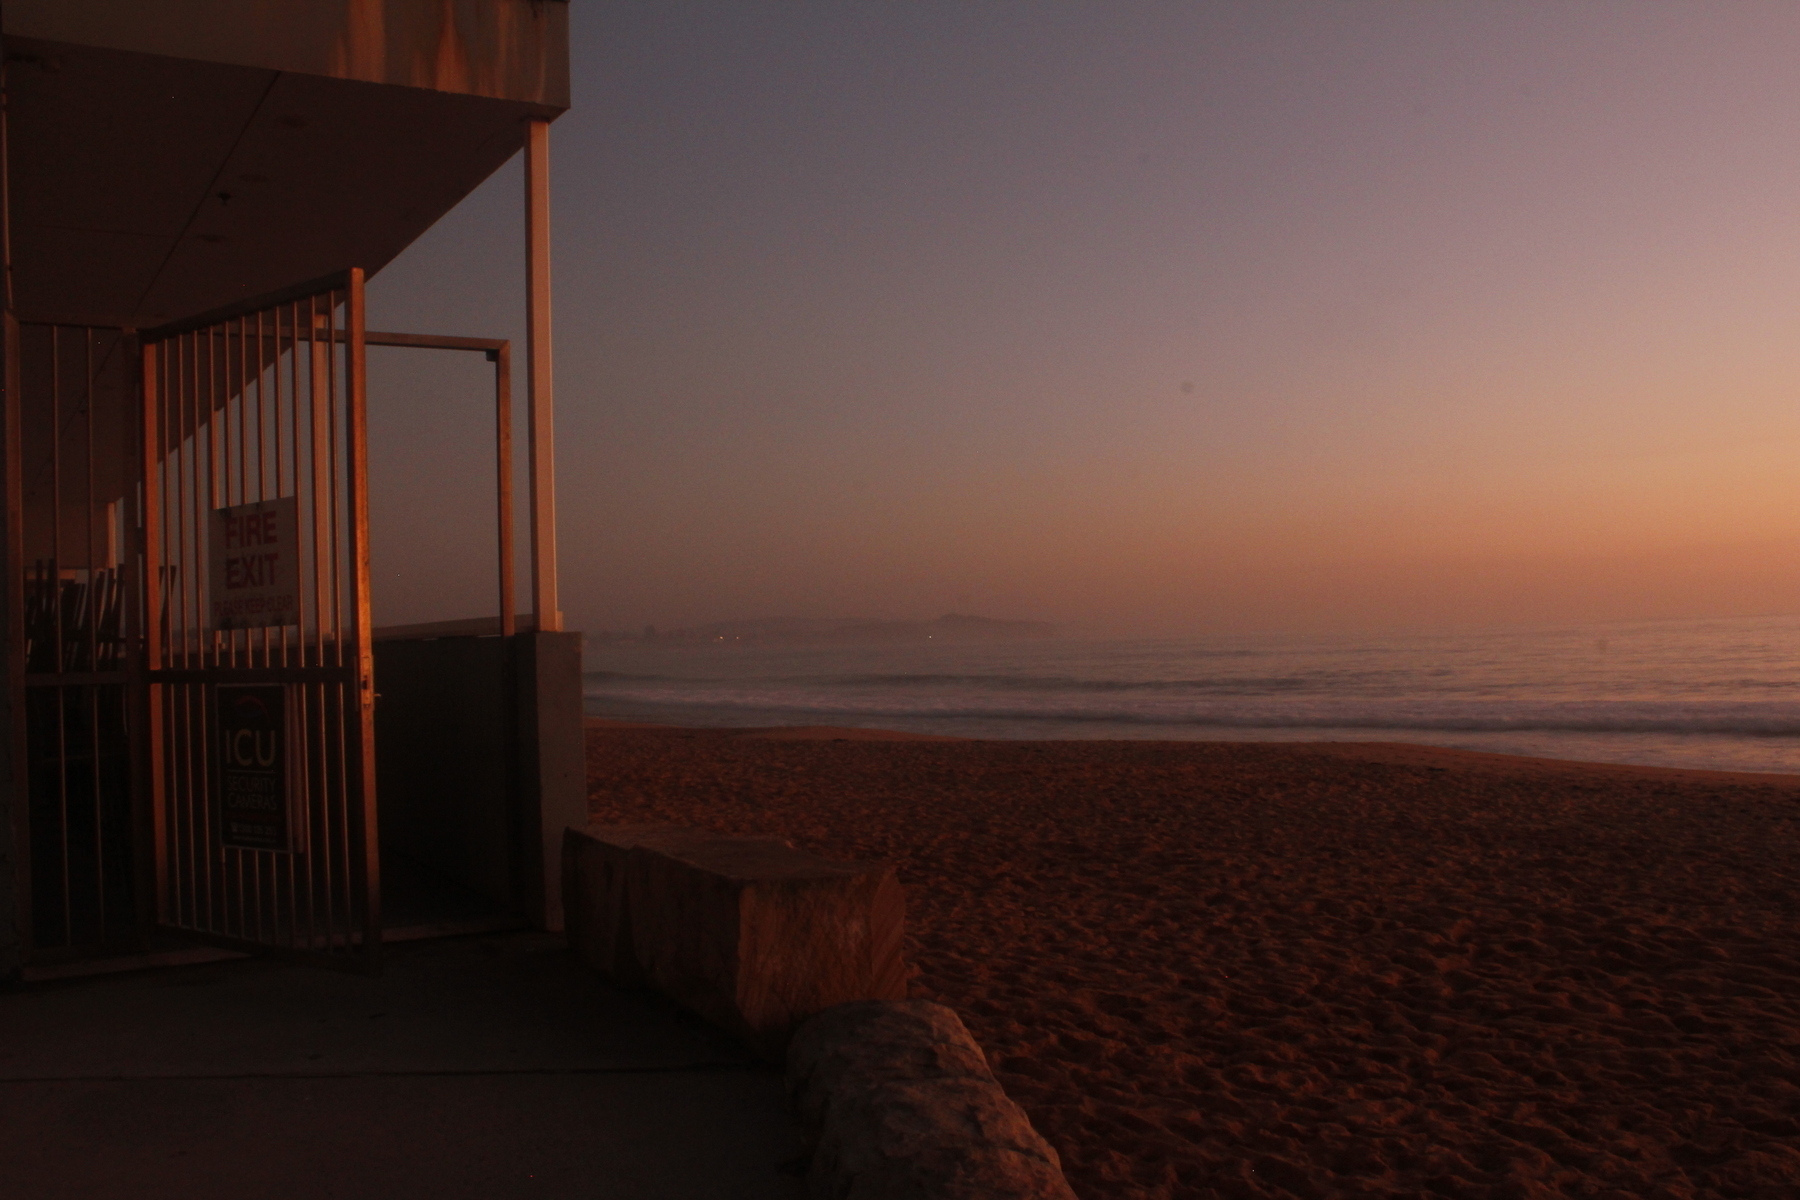 The edge of a sea wall and a building with an iron gate and open walkway, overlooking a beach and a small surf at dawn. The horizon is a fuzzy read with faint headlands fading into the distance. The beach and the building are lit with red and deeply shadowed. The sky is red, orange and purple.